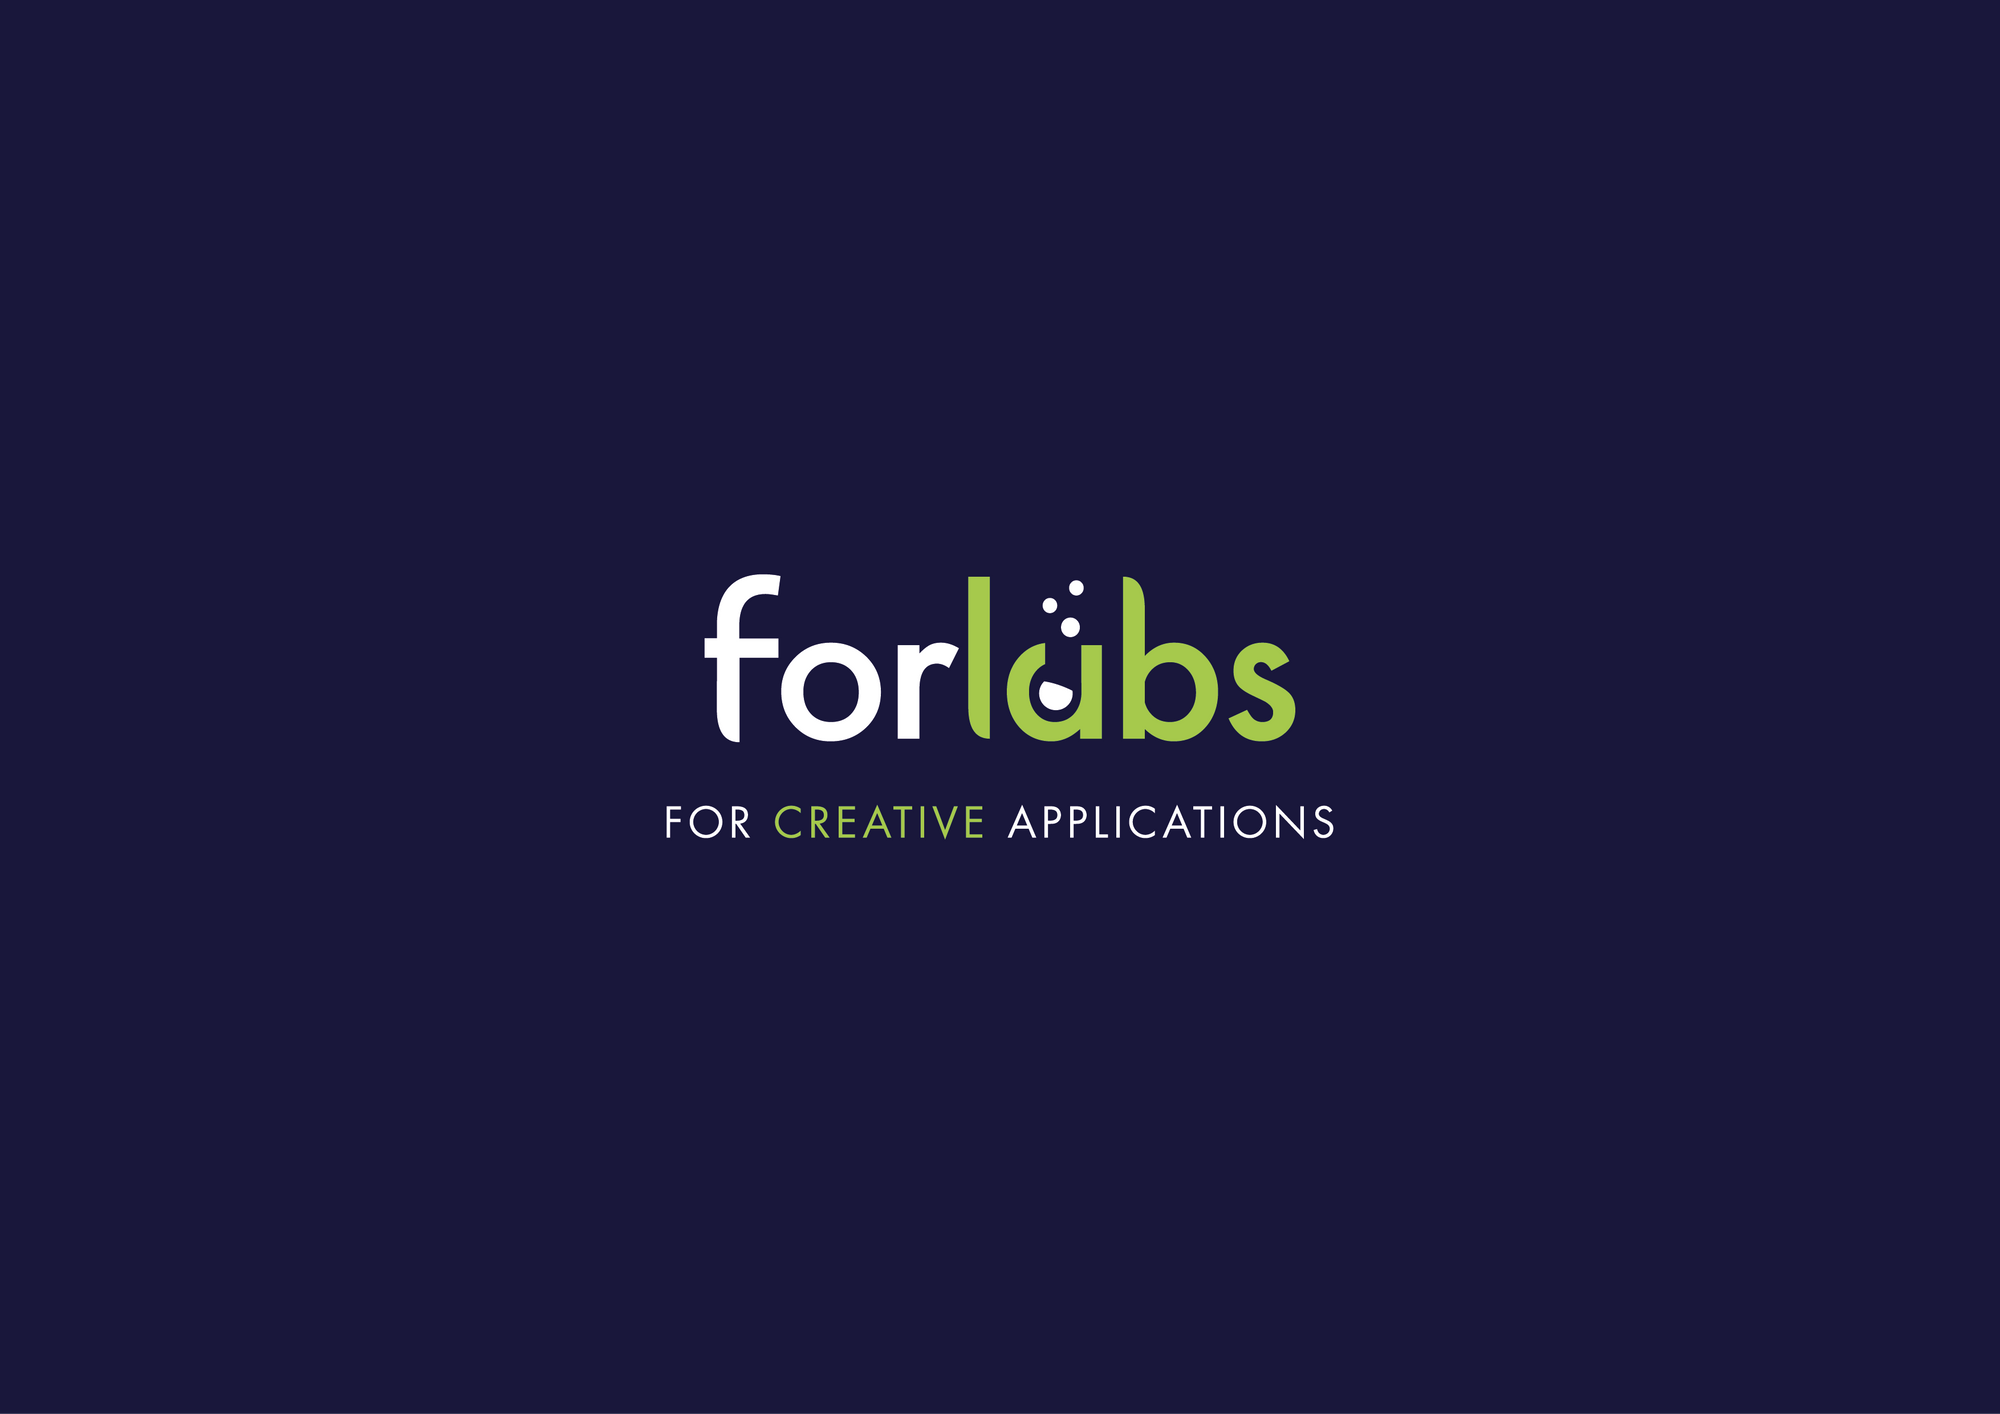 FORLABS